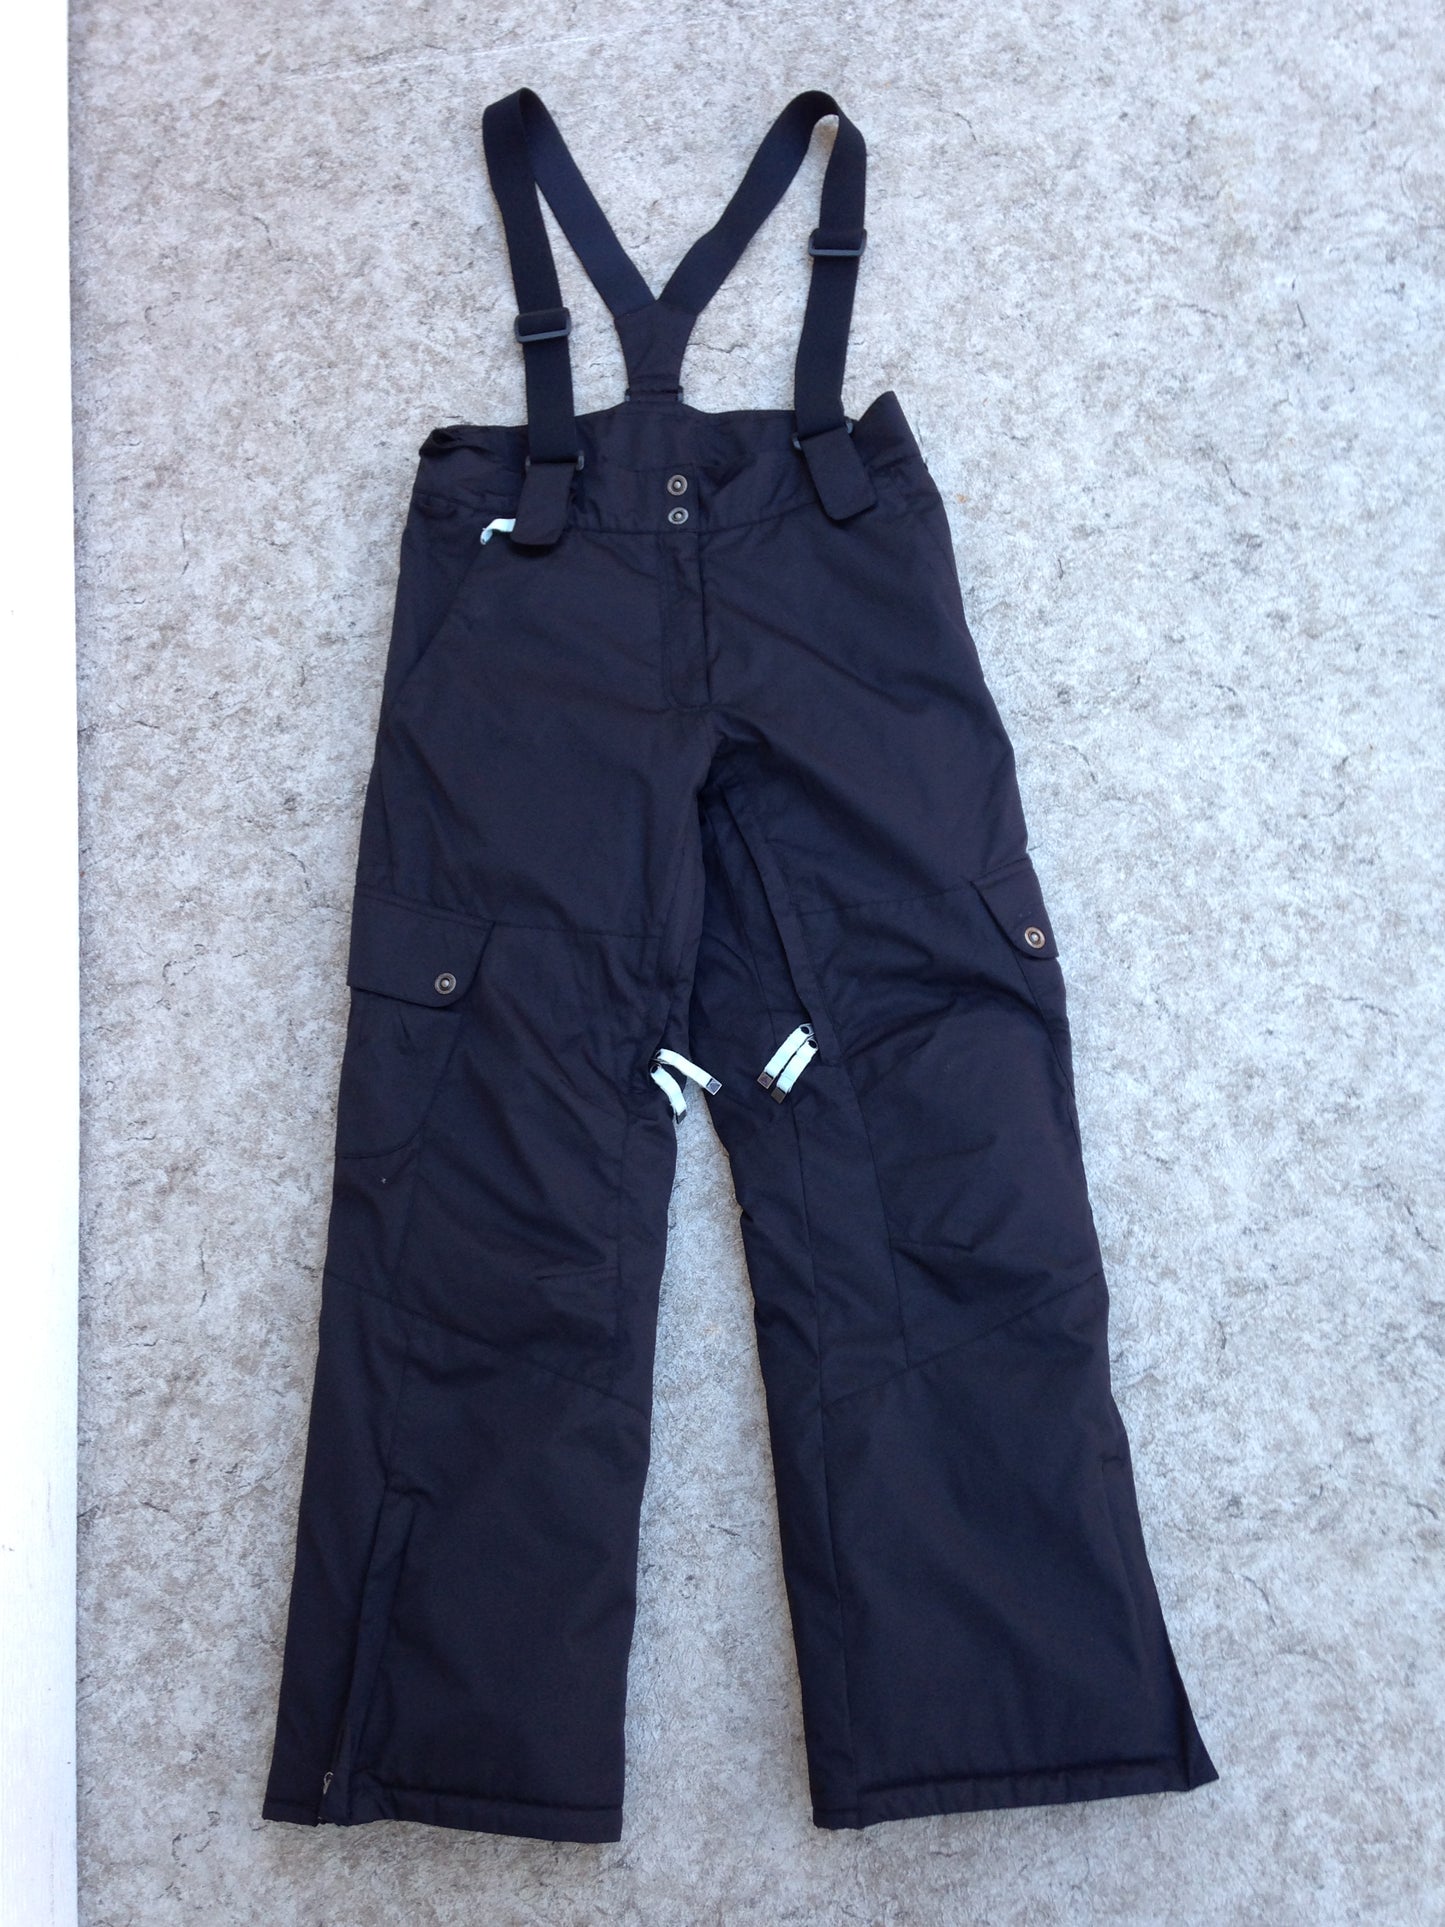 Snow Pants Child Size 12-14 Firefly Black Teal Micro Fleece Lining Straps New Demo Model